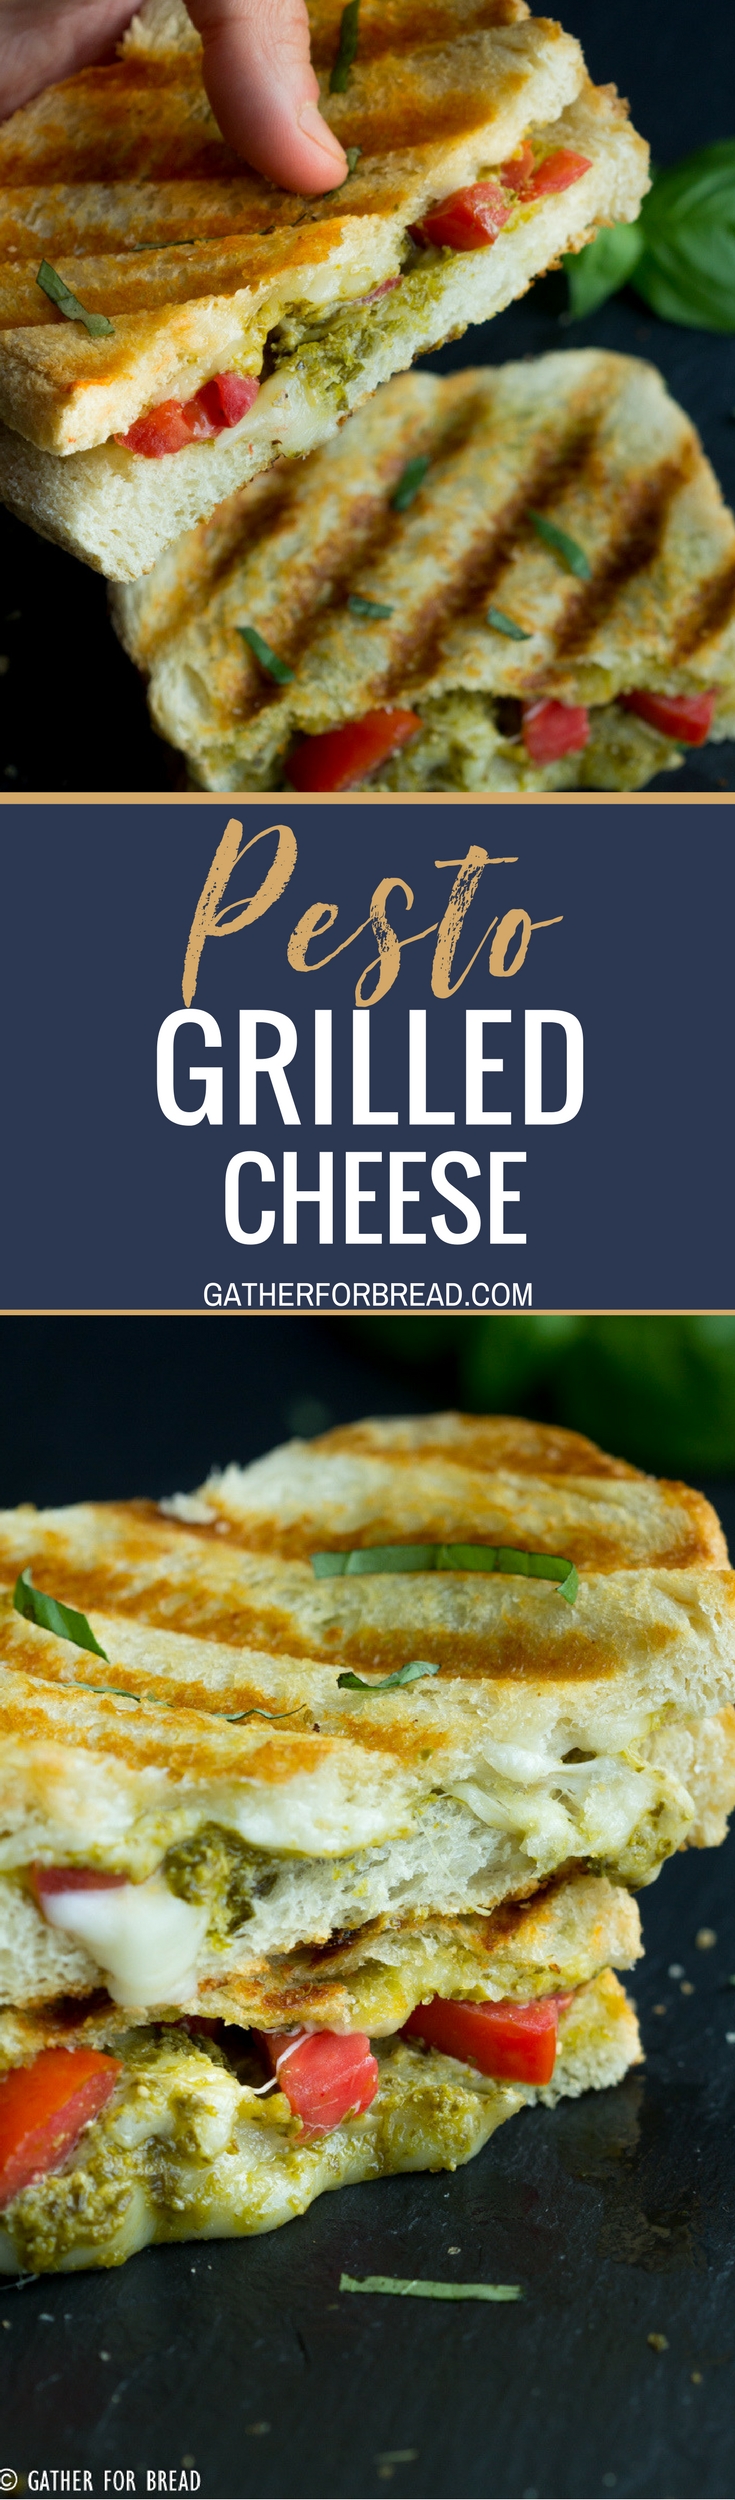 Pesto Grilled Cheese - Easy and tasty grilled cheese sandwich on perfect sourdough bread. Quick delicious lunch!